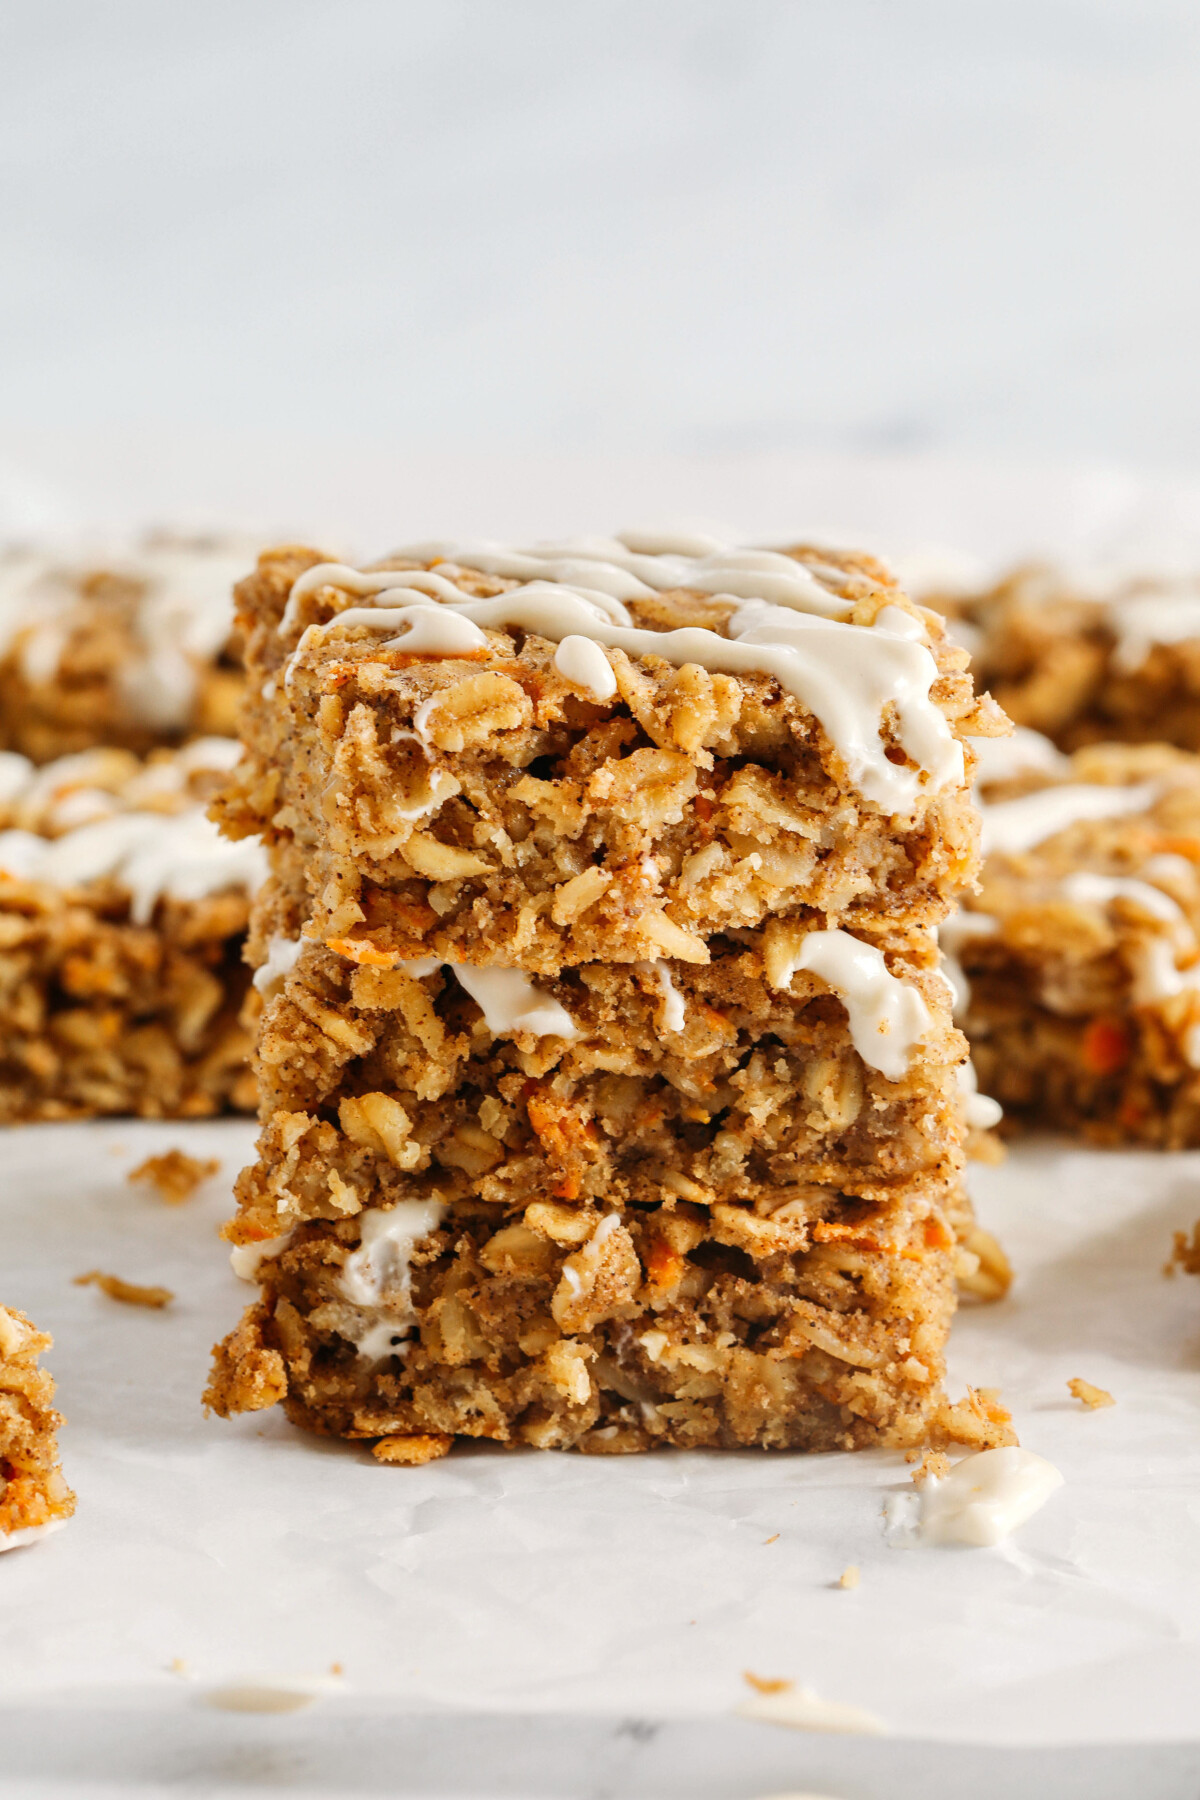 These EASY Carrot Cake Oatmeal Breakfast Bars make a quick on-the-go breakfast, snack or healthy dessert made with zero refined sugar and drizzled with a delicious maple cream cheese frosting! 